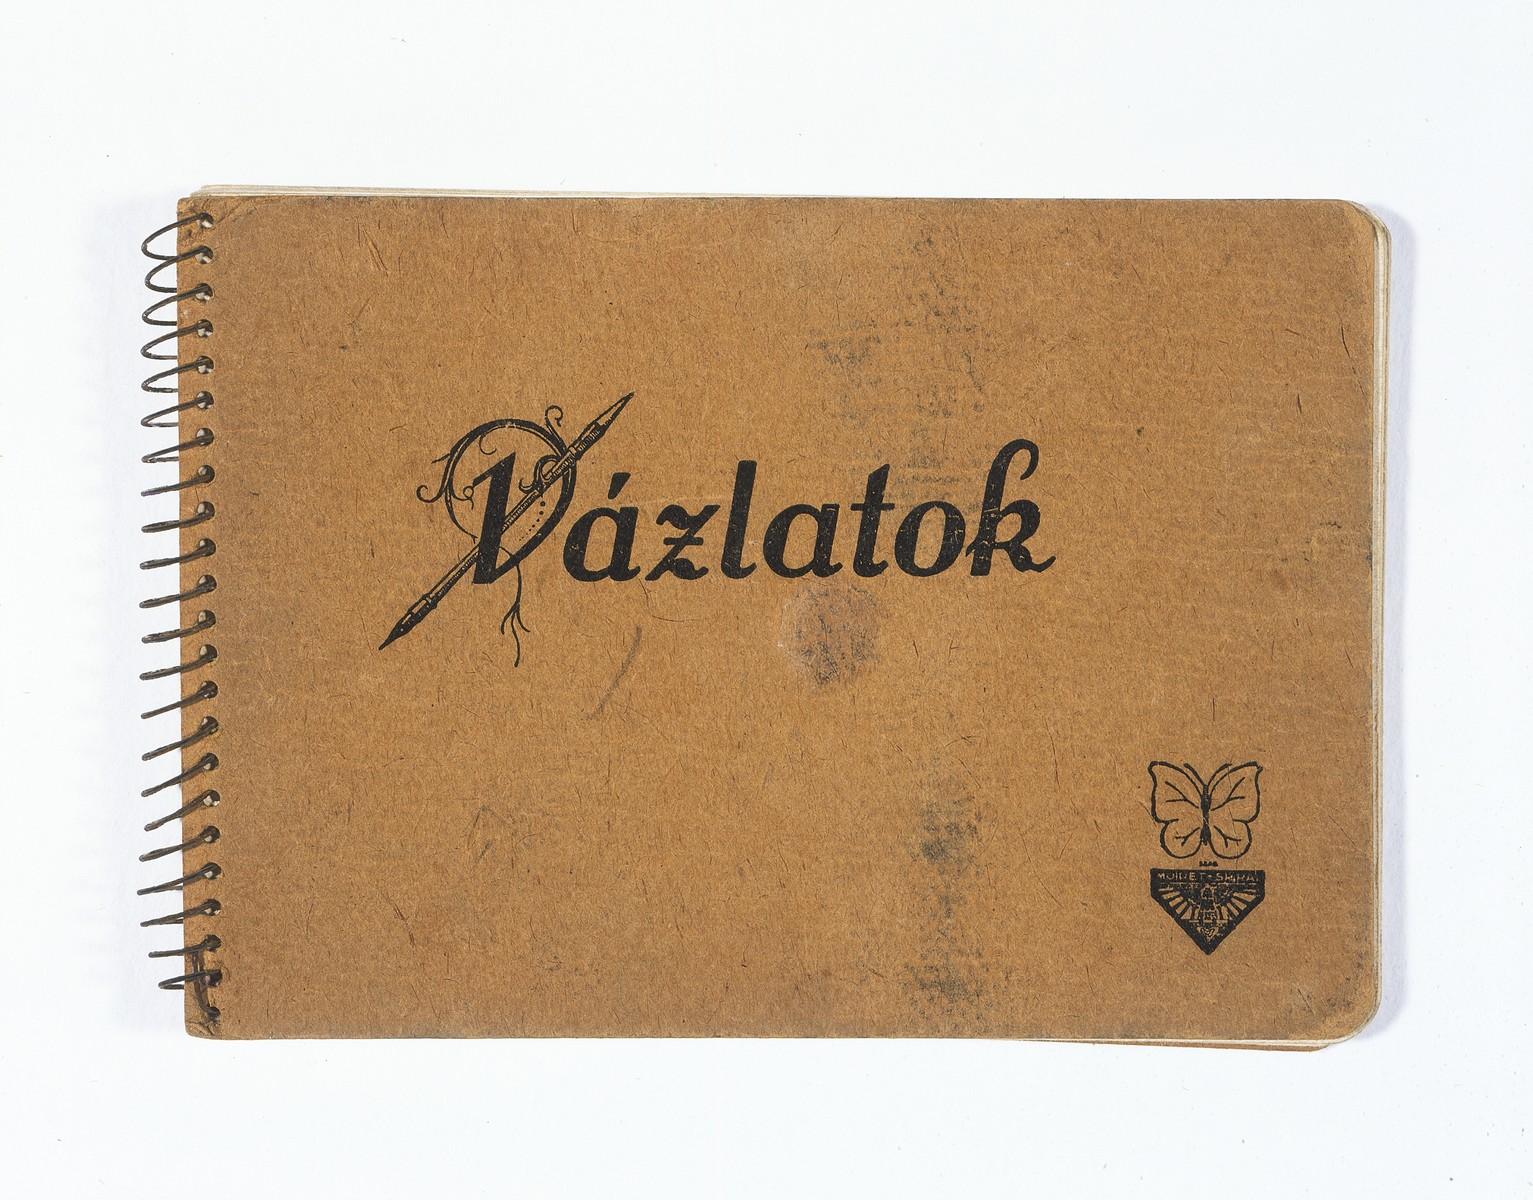 The cover of a notebook created by Dorottya Dezsoefi while in hiding.